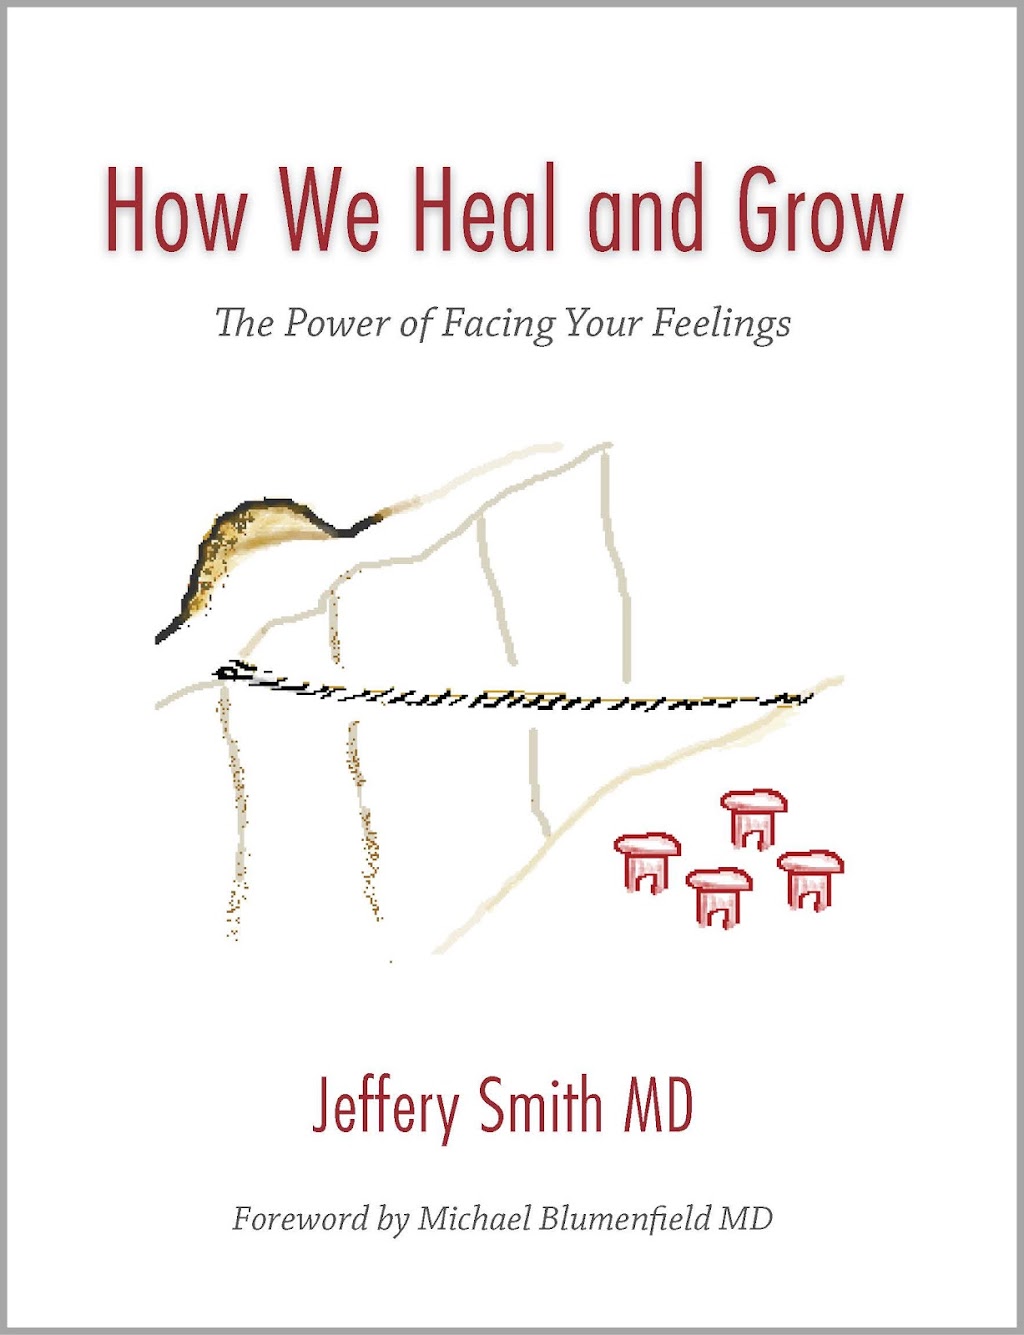 Jeffery Smith MD | Westchester Consultation & Psychotherapy | 260 Garth Rd Suite 2J4, Scarsdale, NY 10583 | Phone: (914) 725-3901